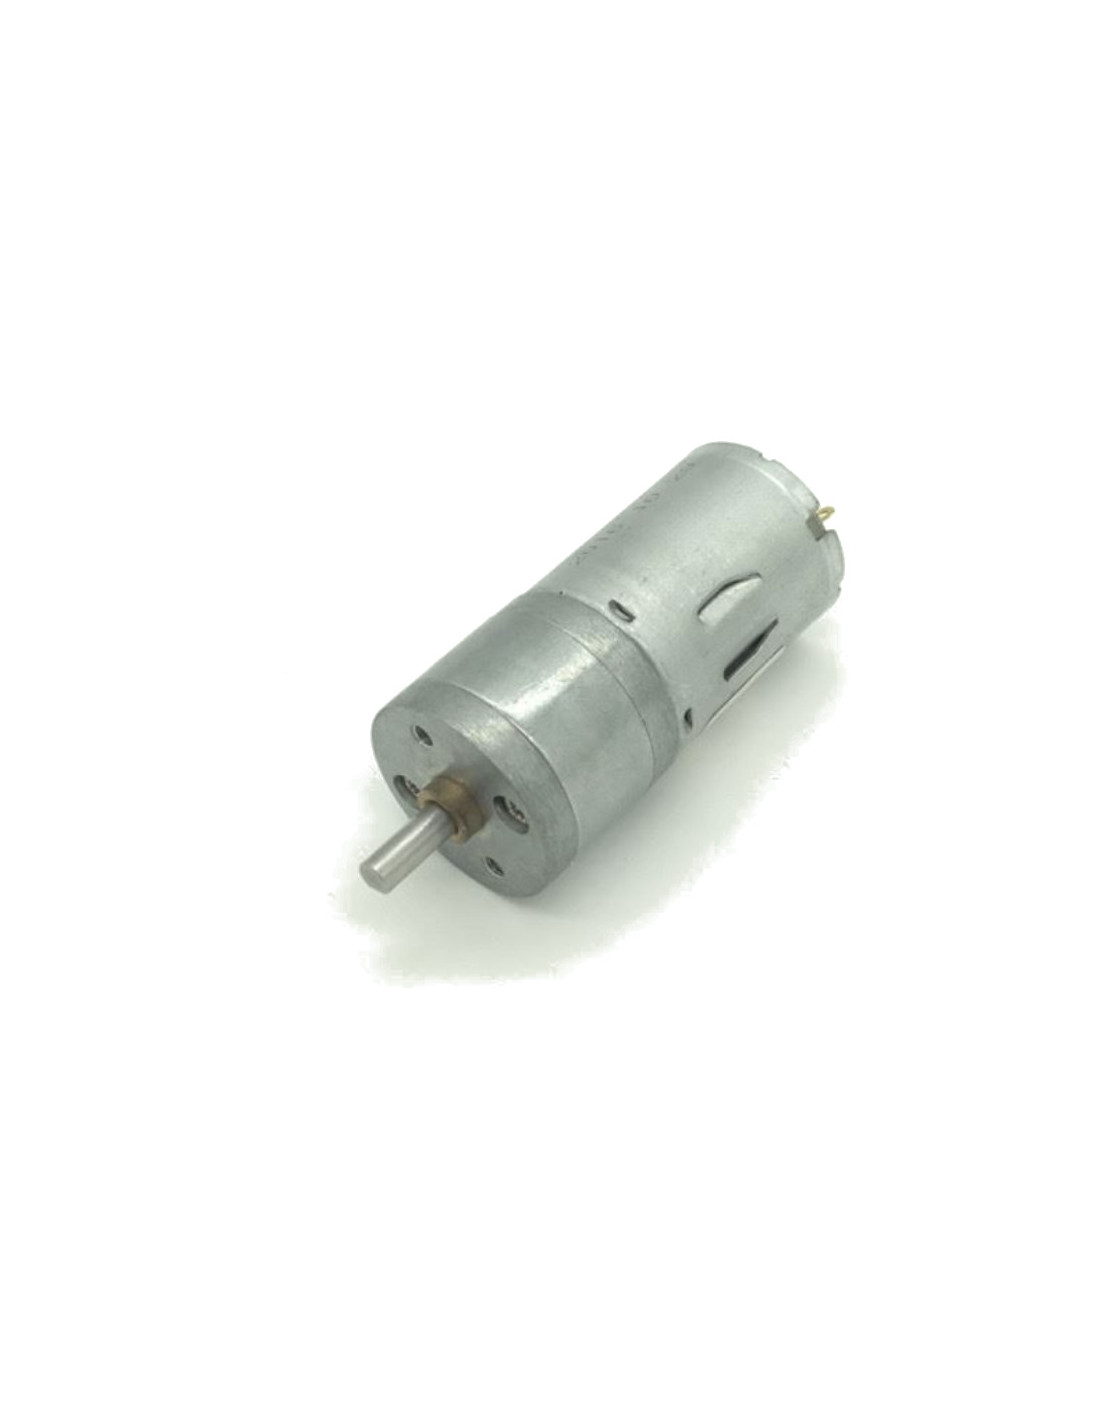 DC motor with gearbox, 6V 12RPM